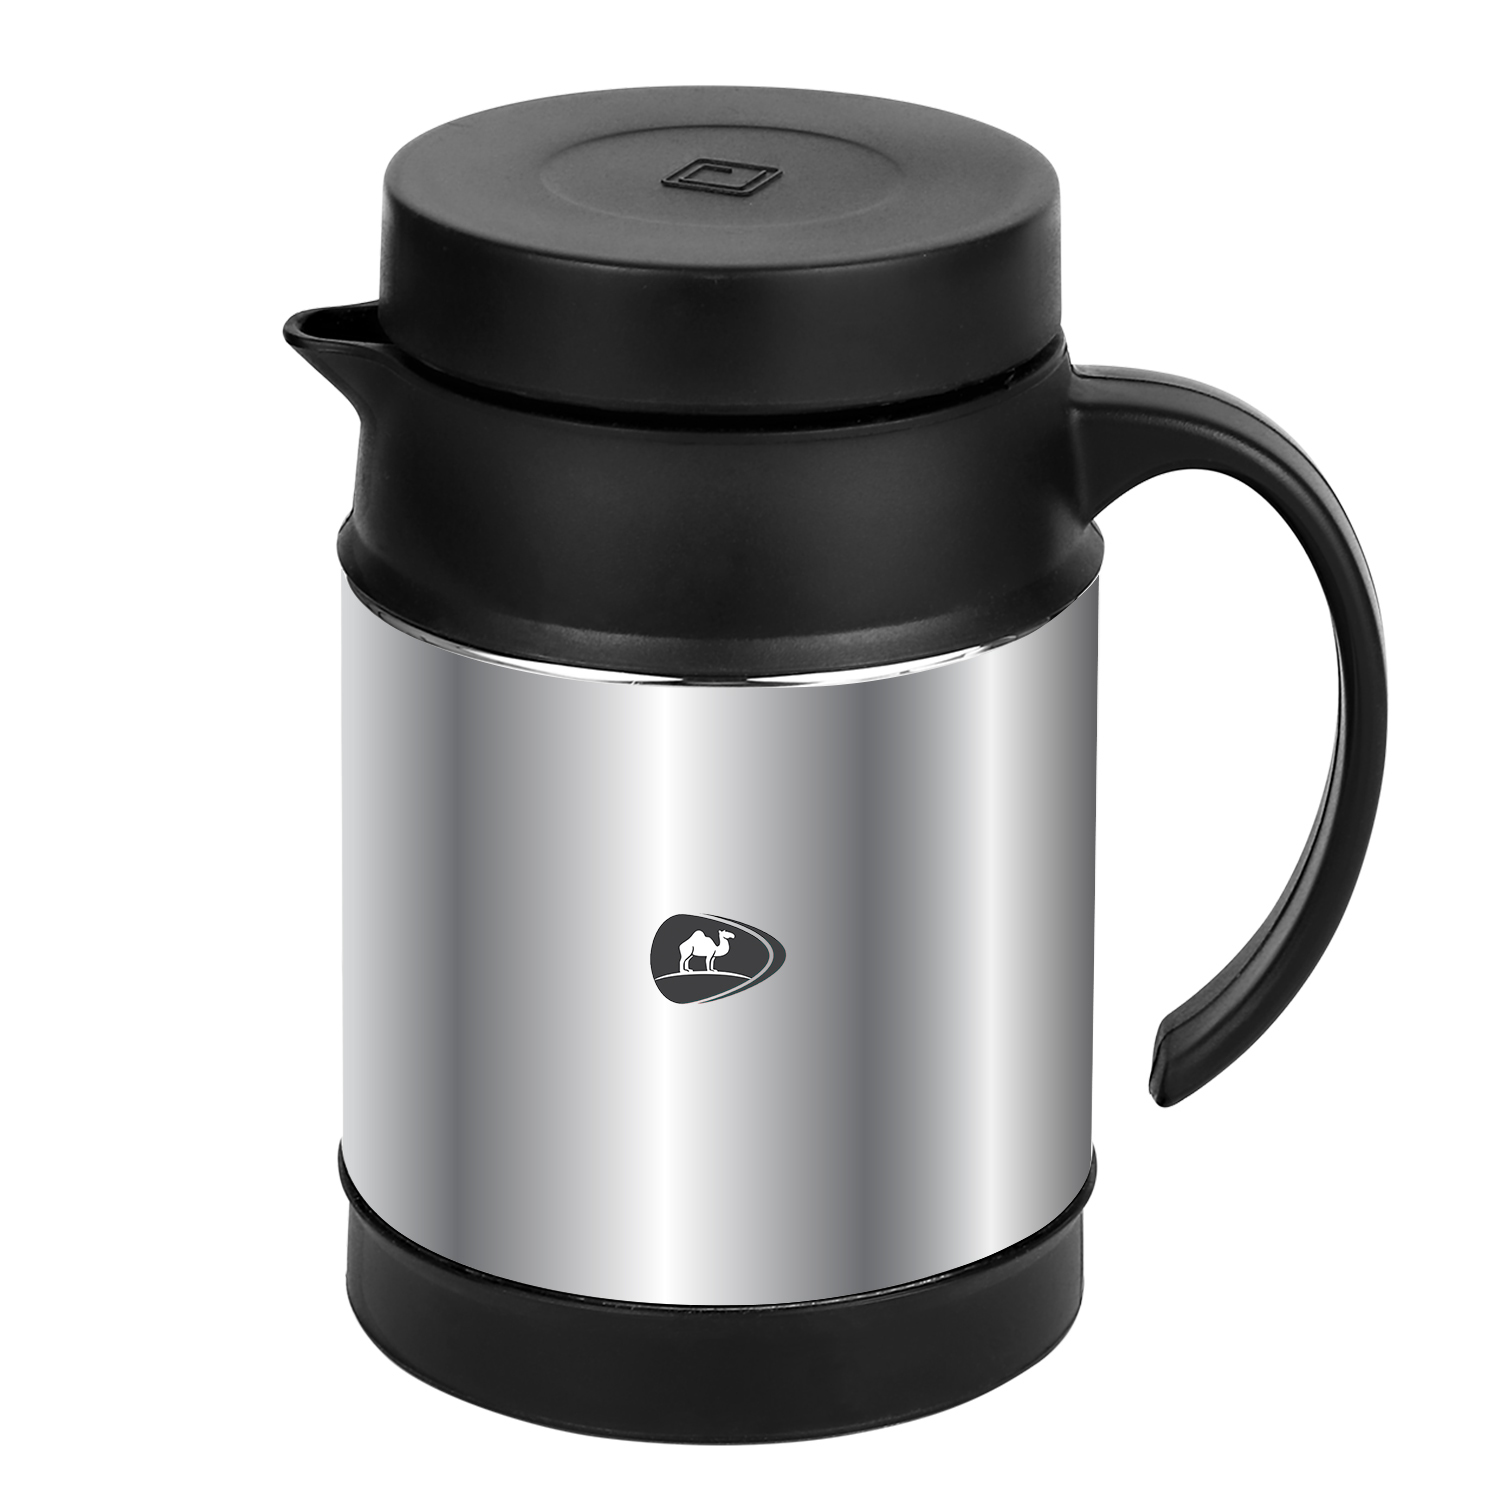 Stainless Steel Insulated Kettle